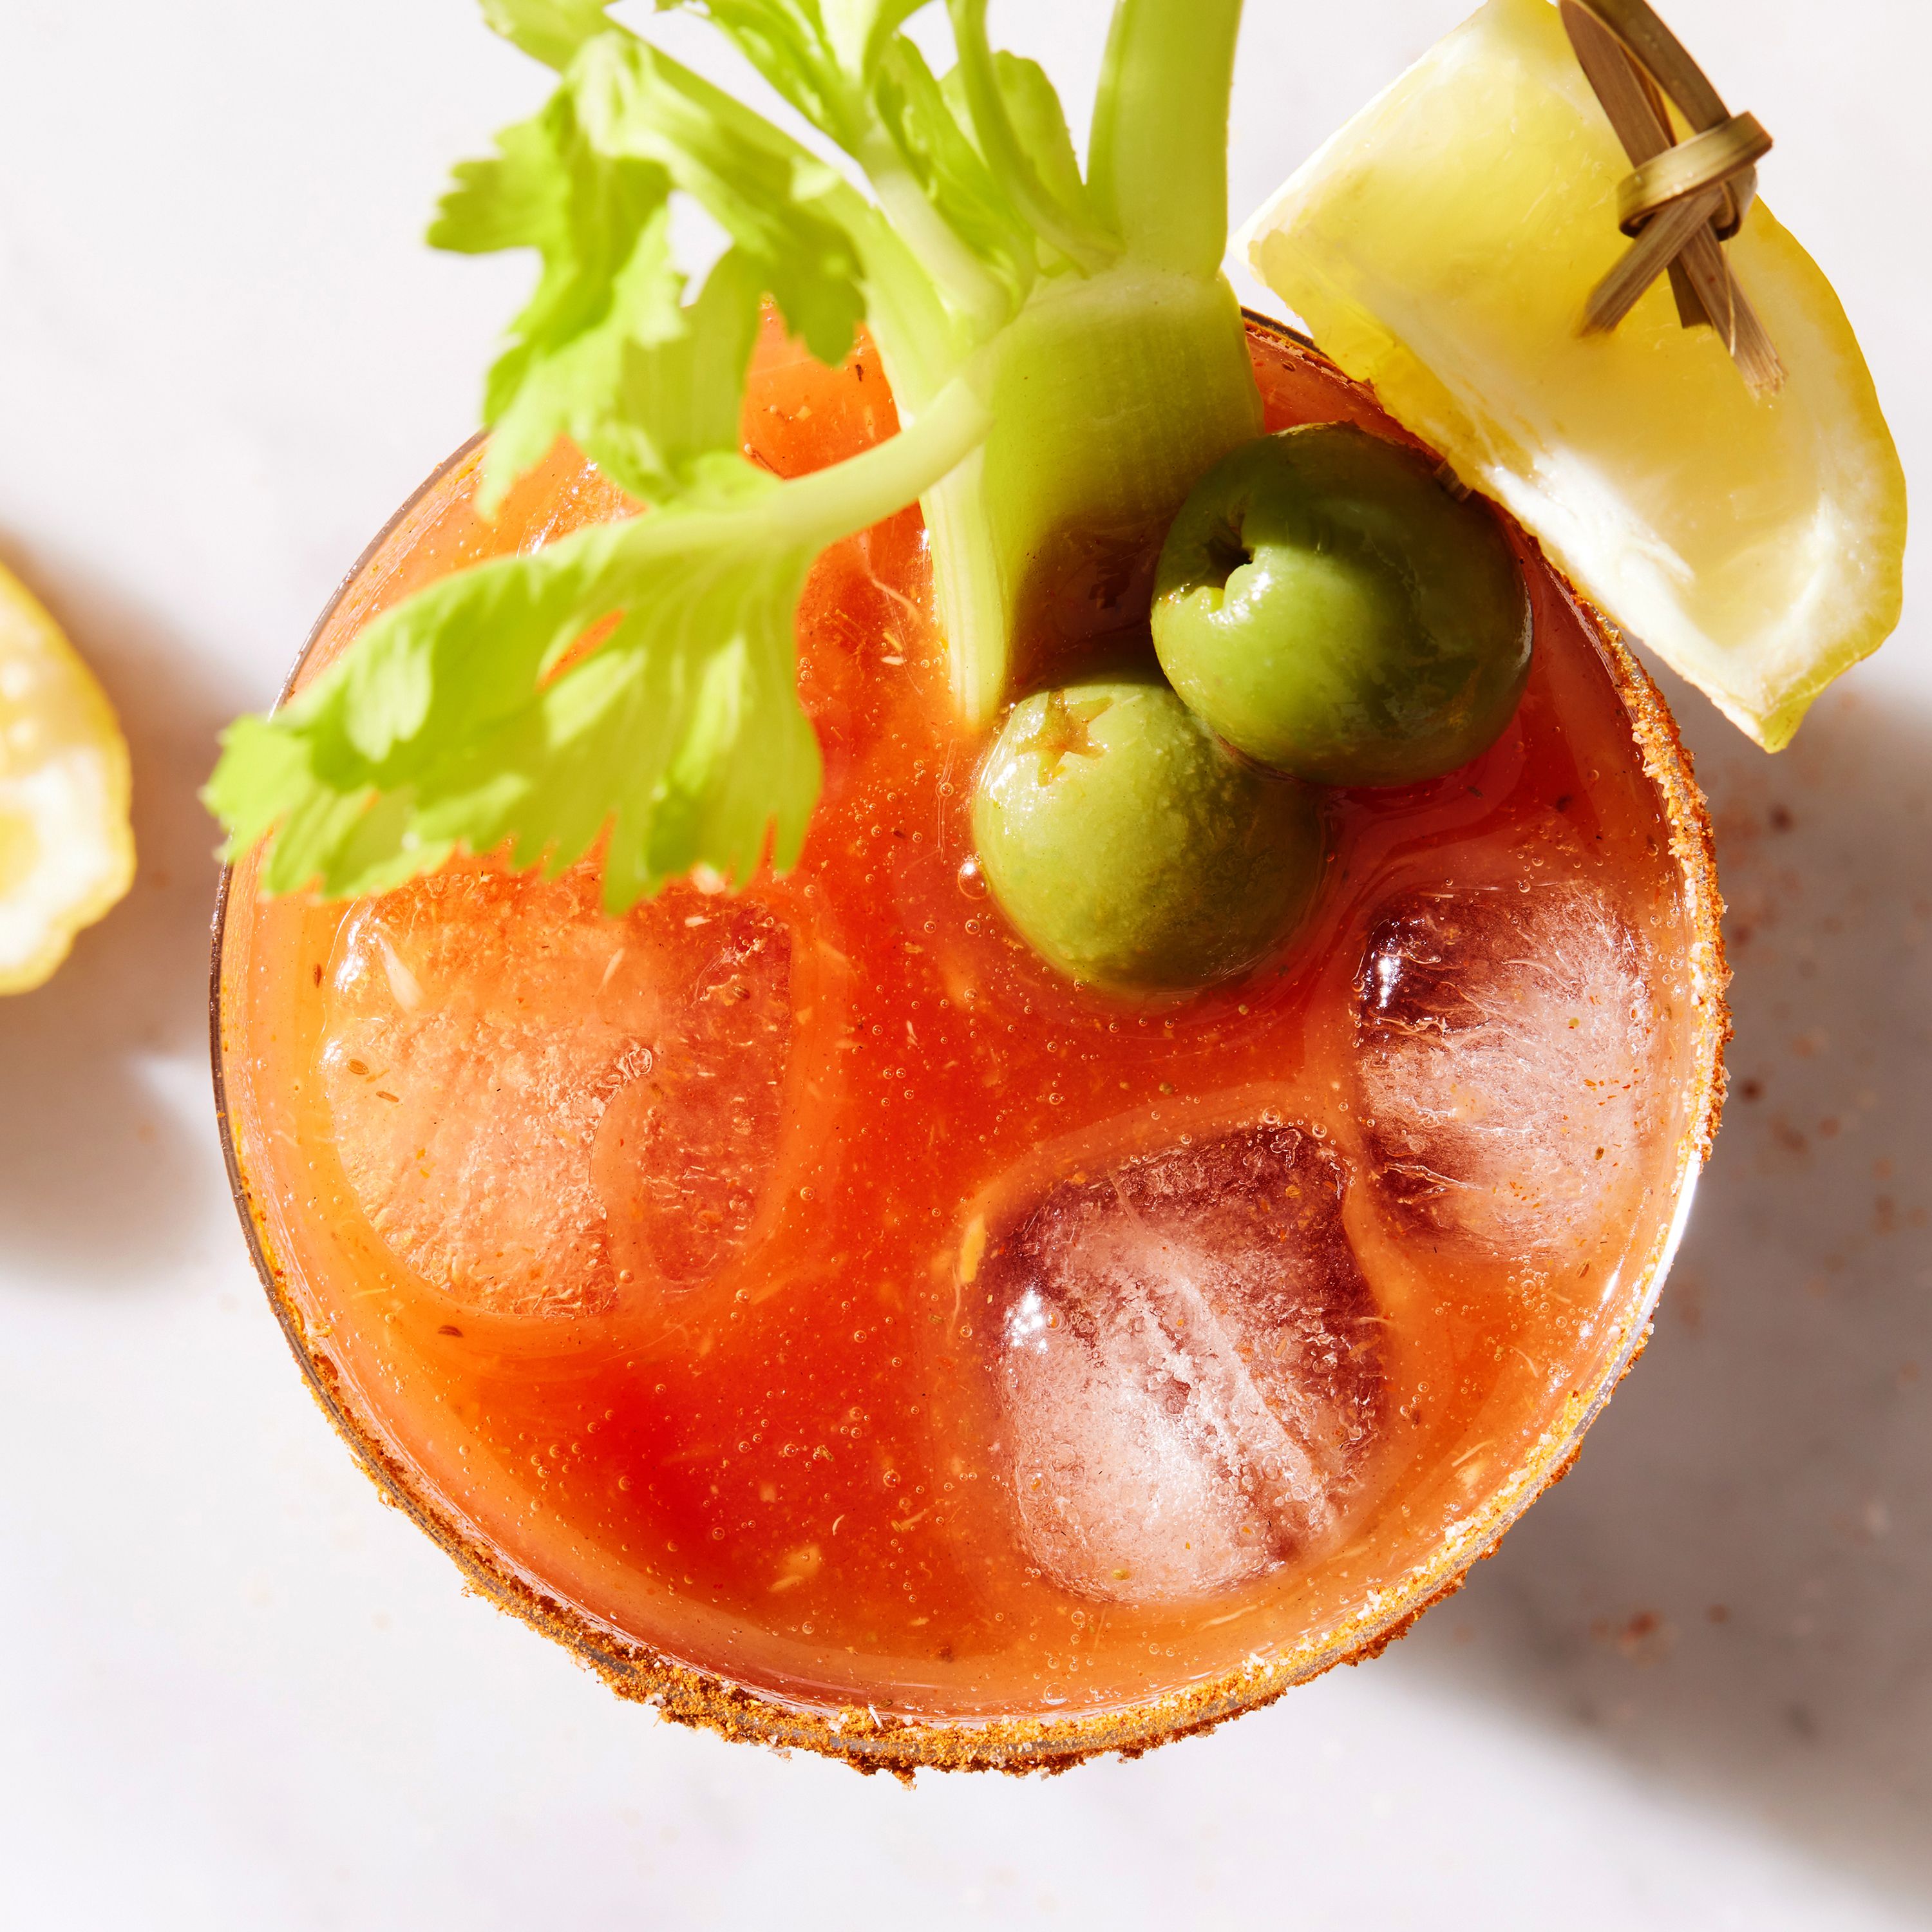 Best Bloody Mary Recipe - How to Make a Bloody Mary